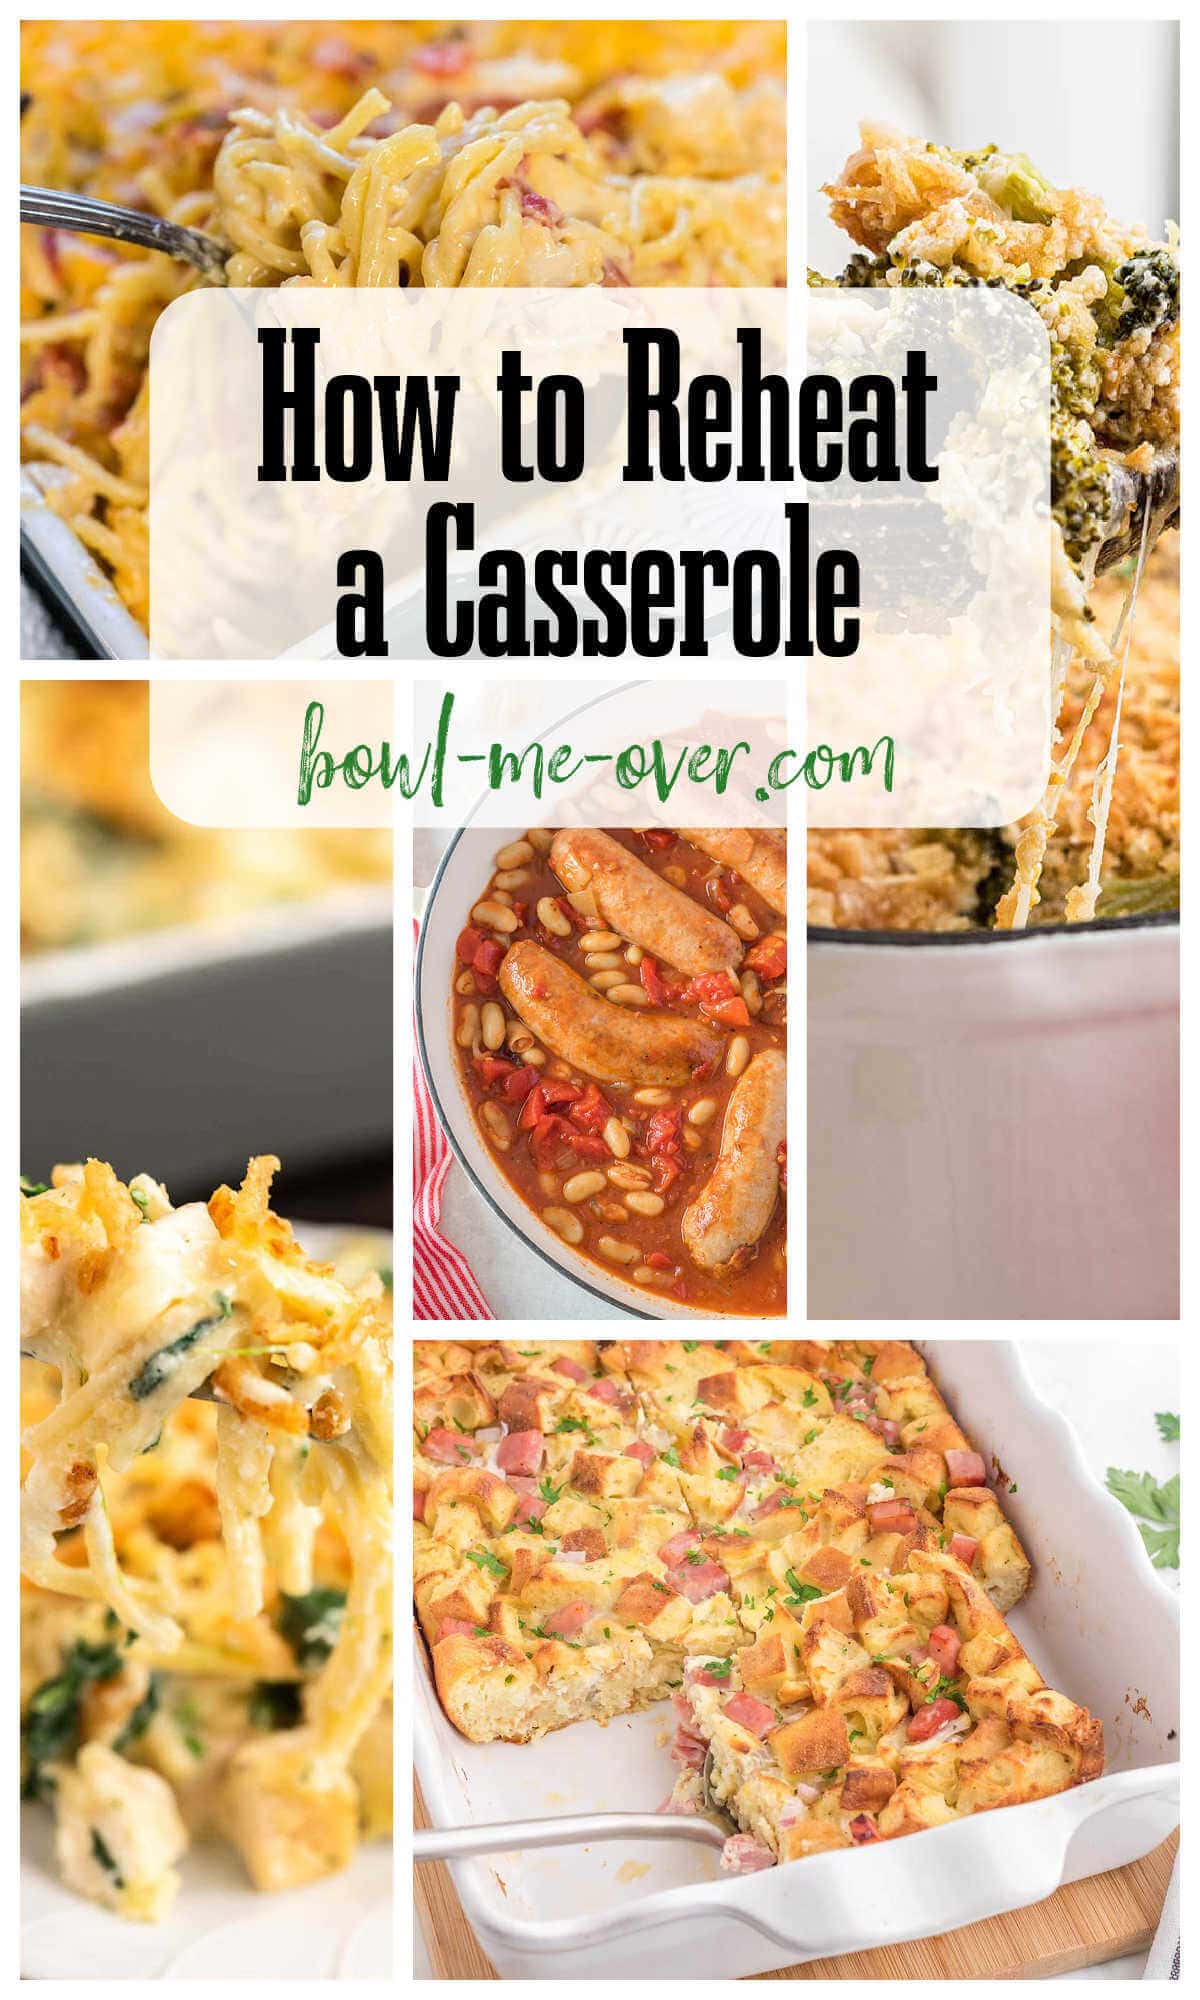 Collage of casserole photos with print overlay for Pinterest.